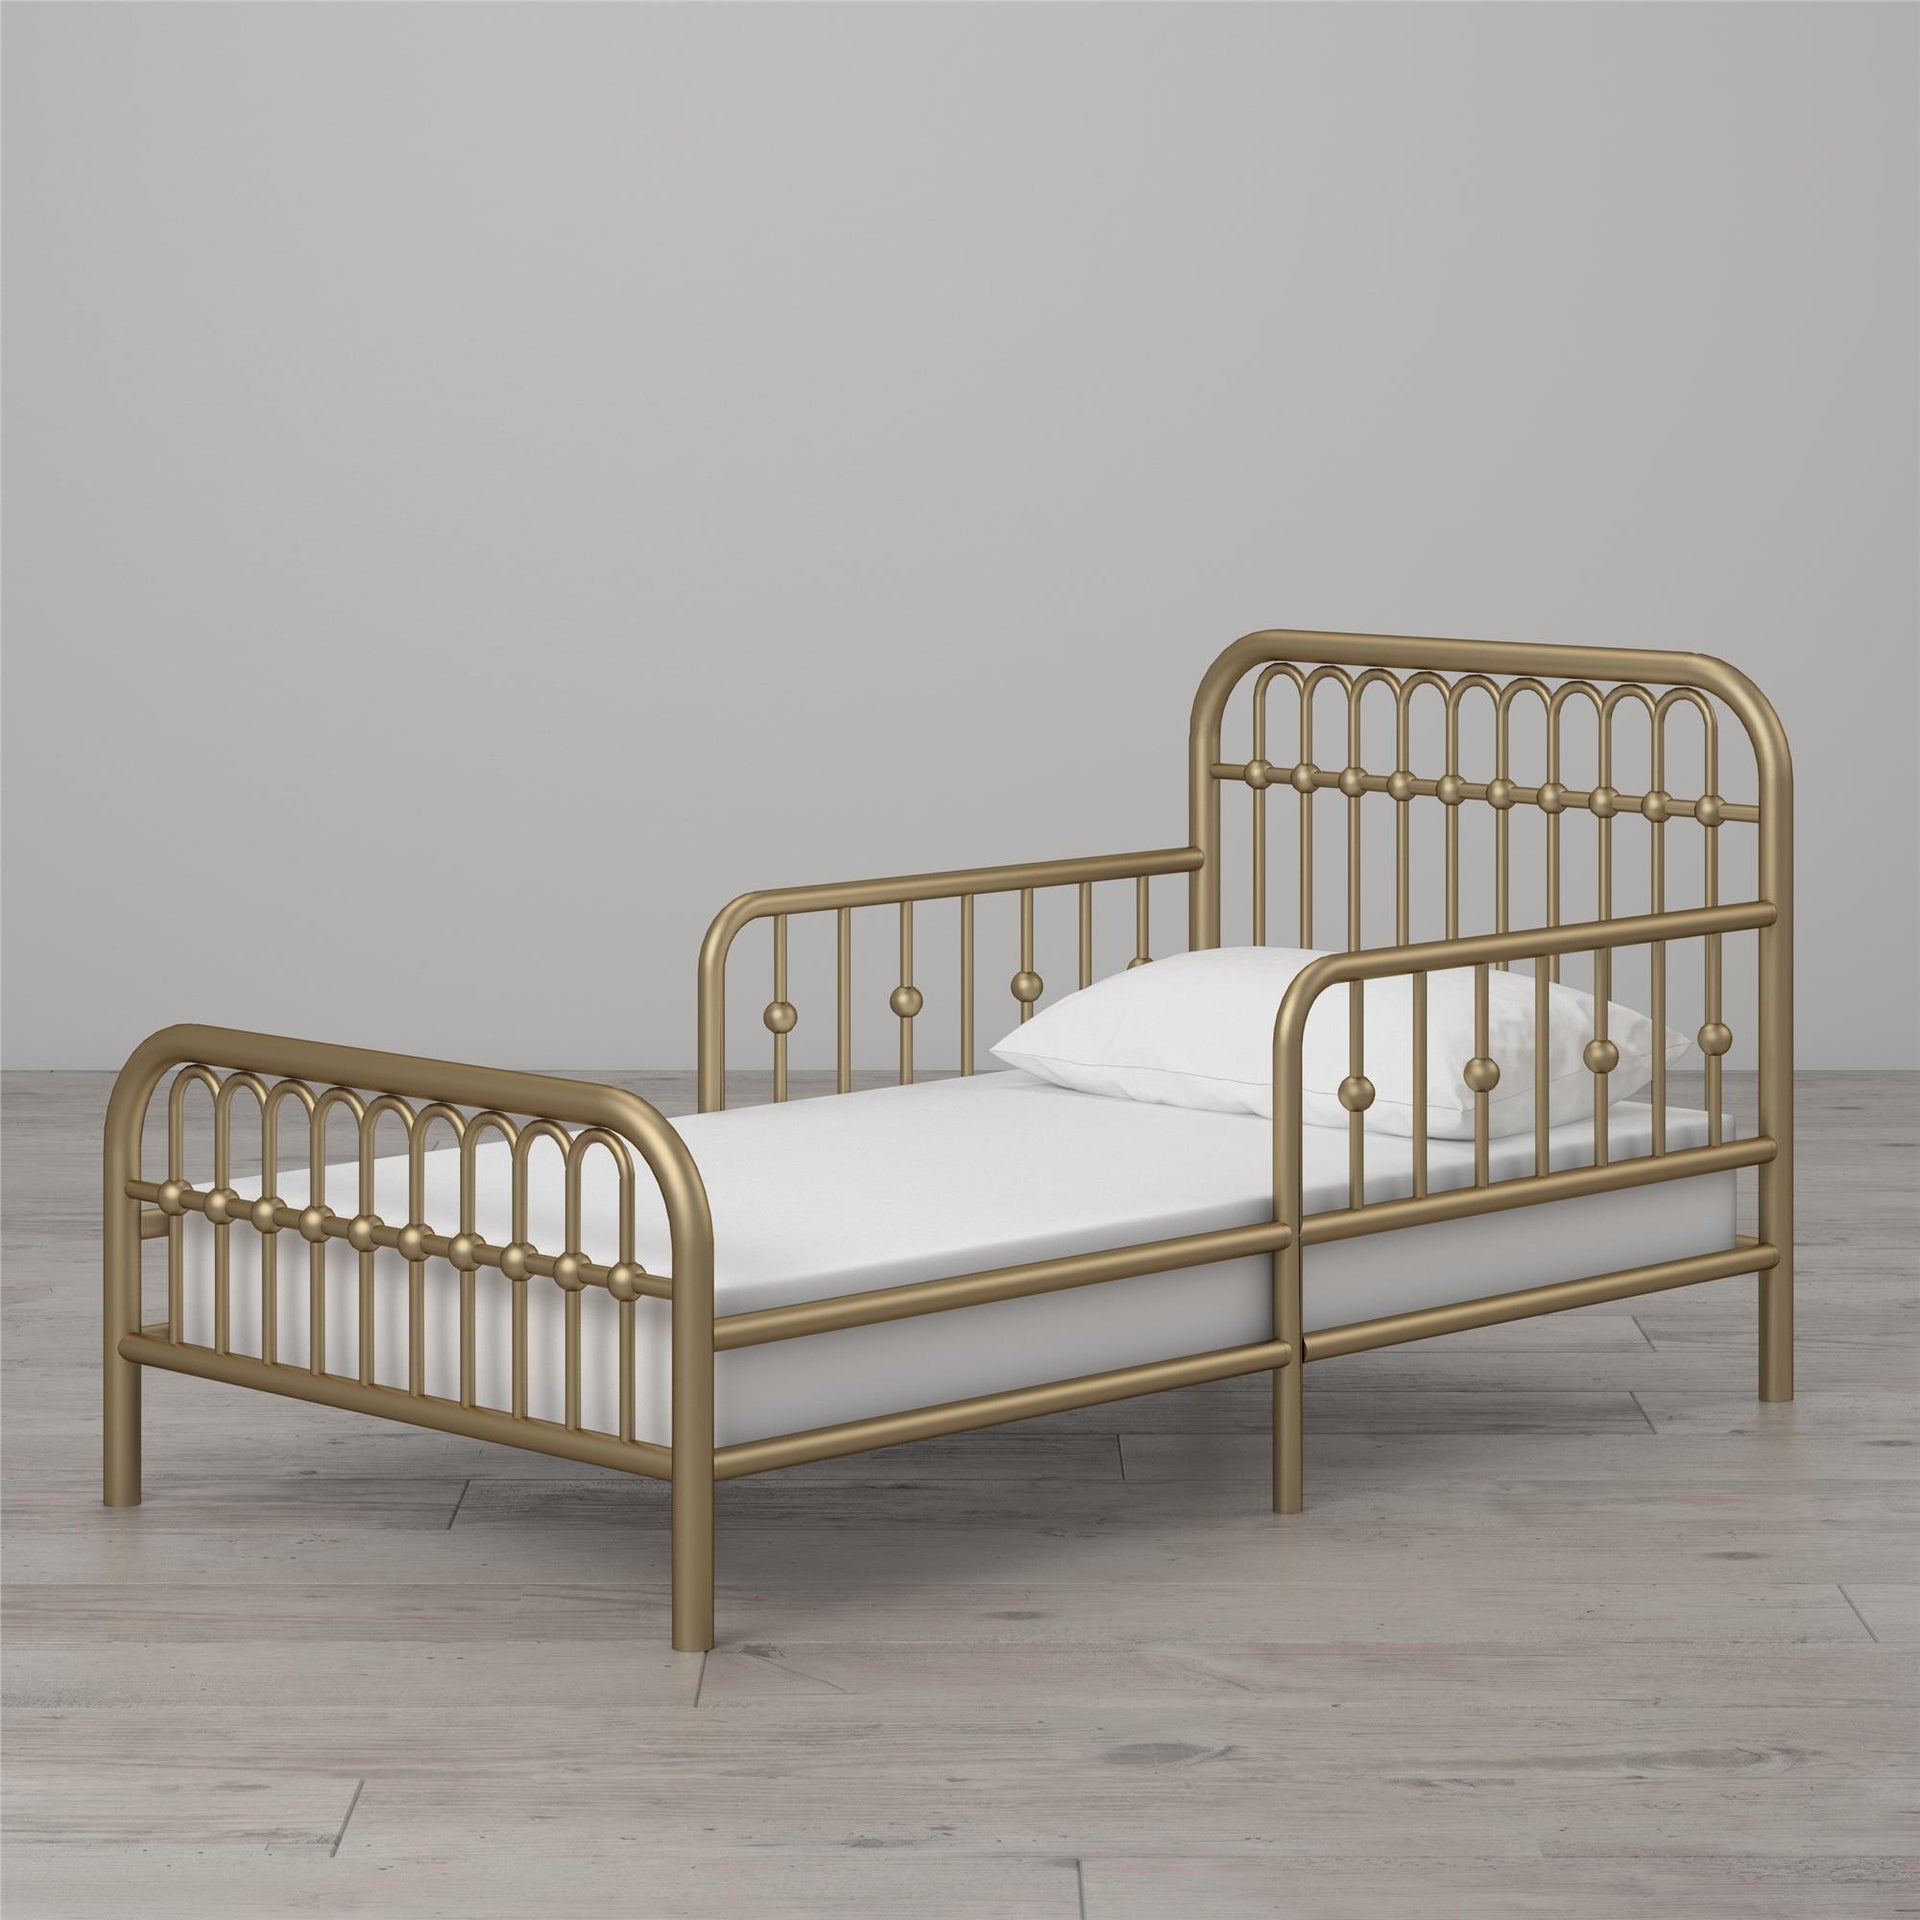 Little Seeds Monarch Hill Ivy Metal Toddler Bed - Gold